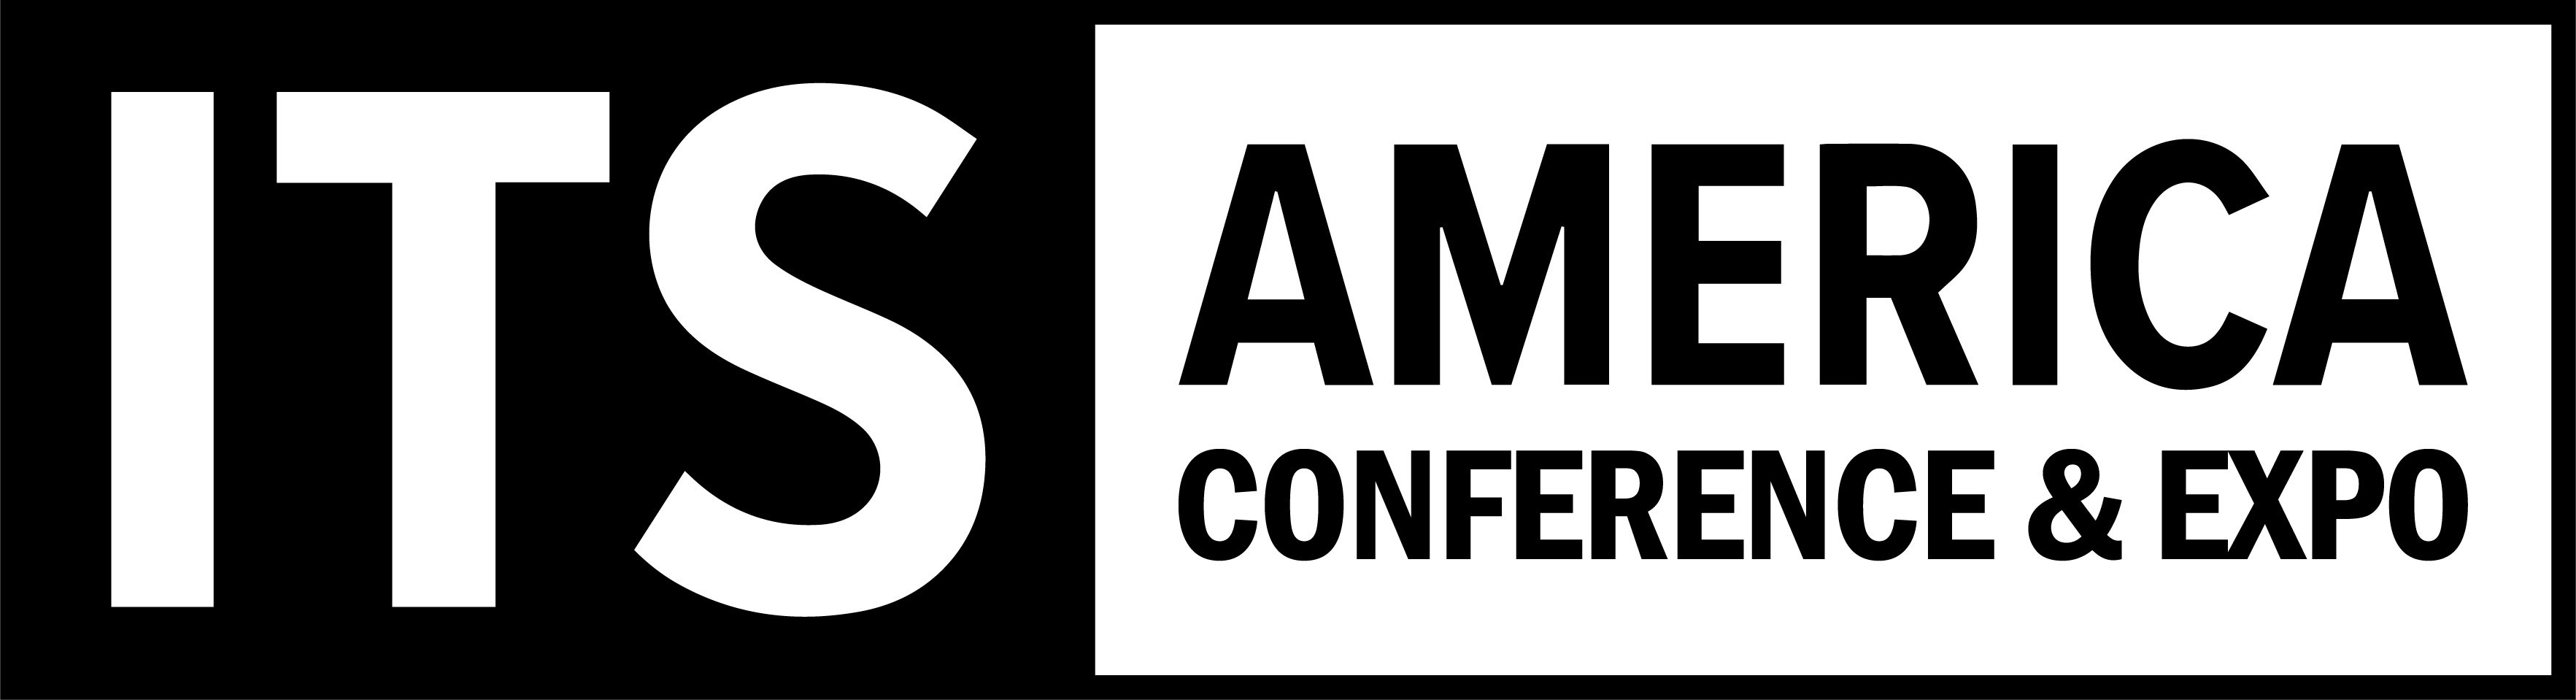 its-america-conference-expo-logo-black.jpg